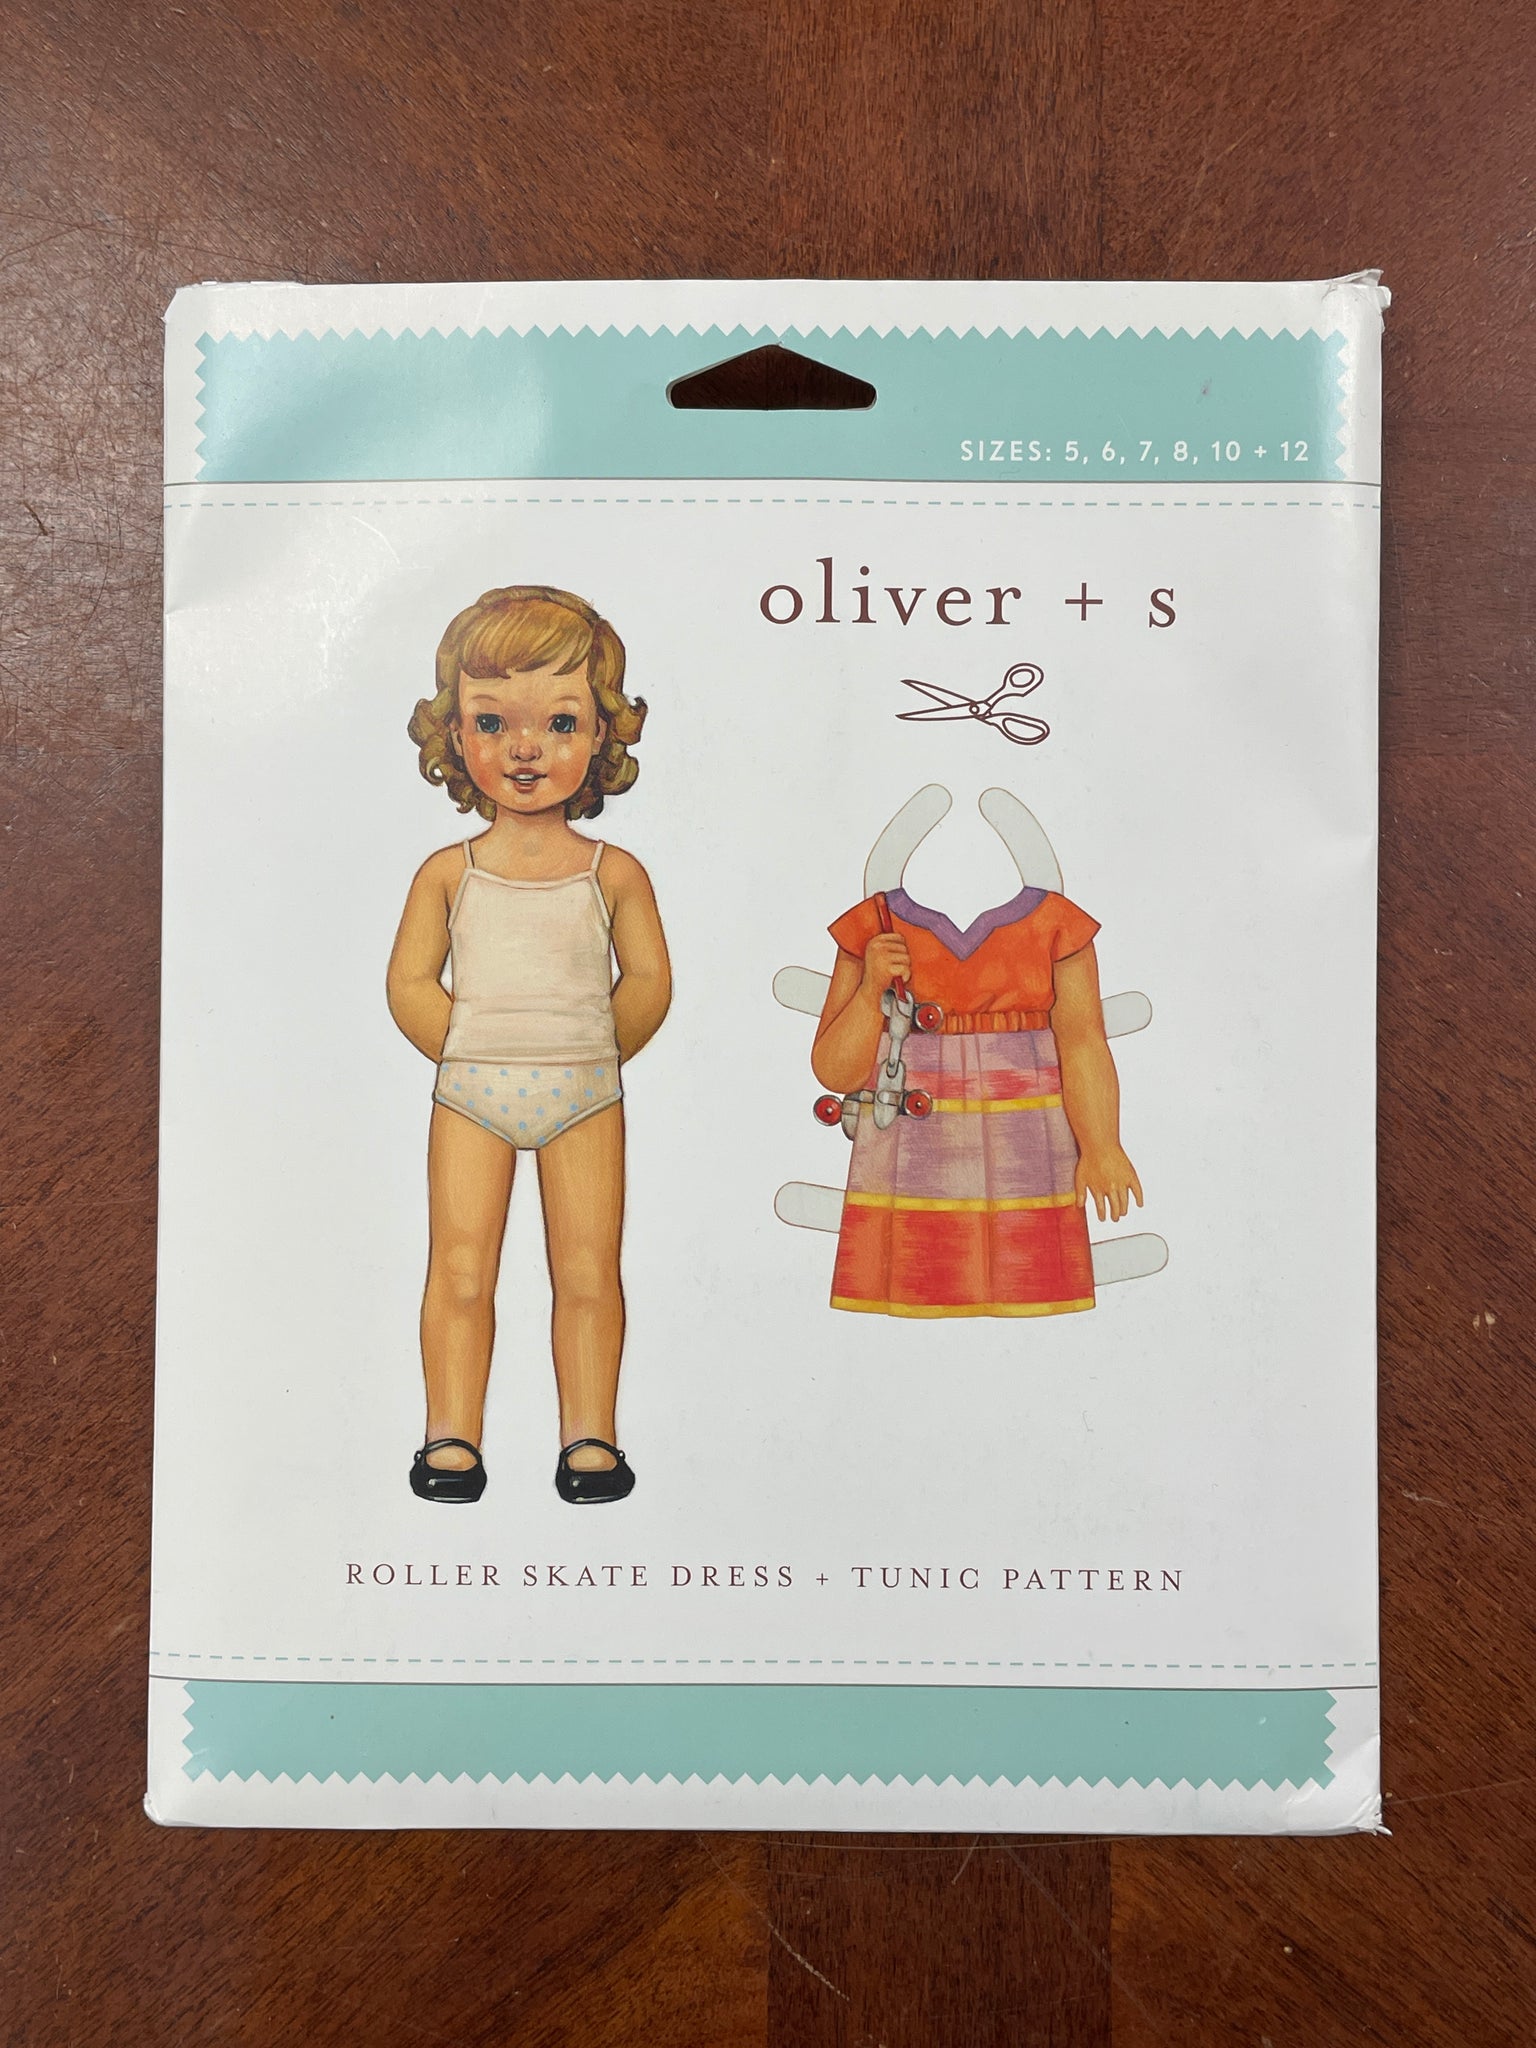 2013 Oliver + S Pattern - Child's Roller Skate Dress and Tunic